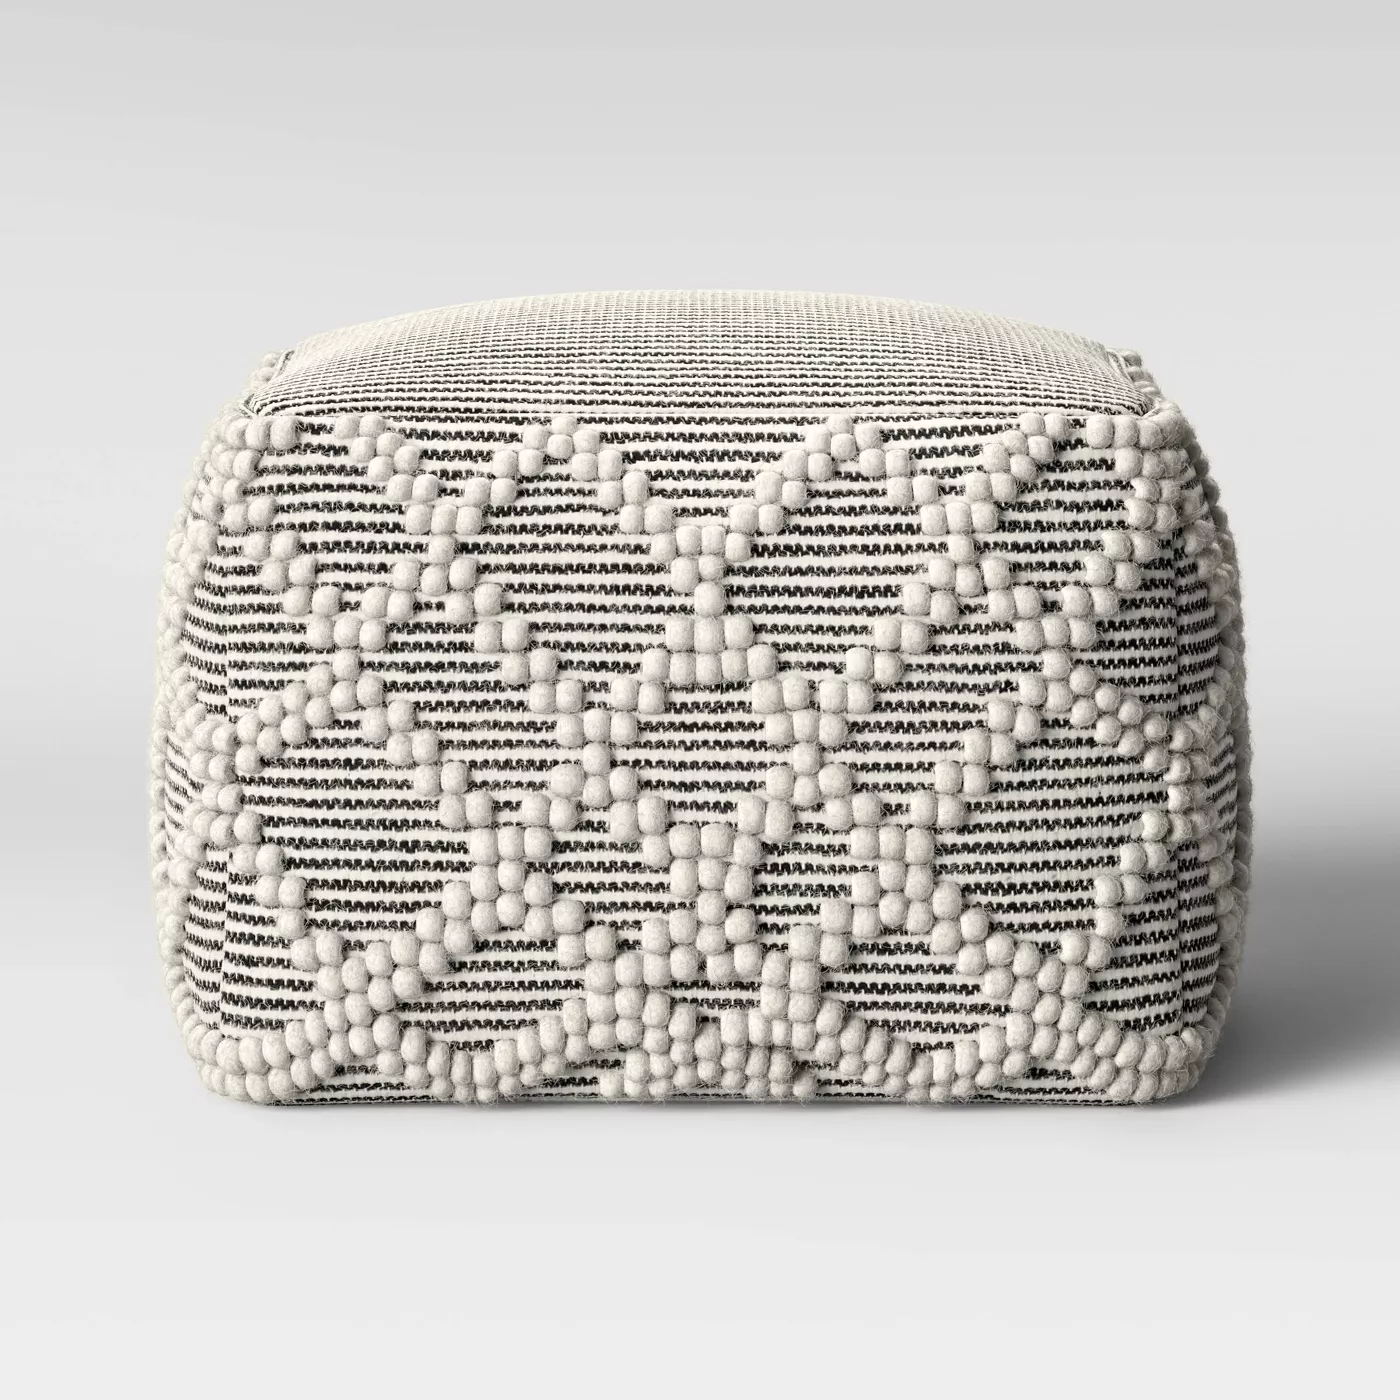 Shop Lory Pouf Textured - Opalhouse from Target on Openhaus